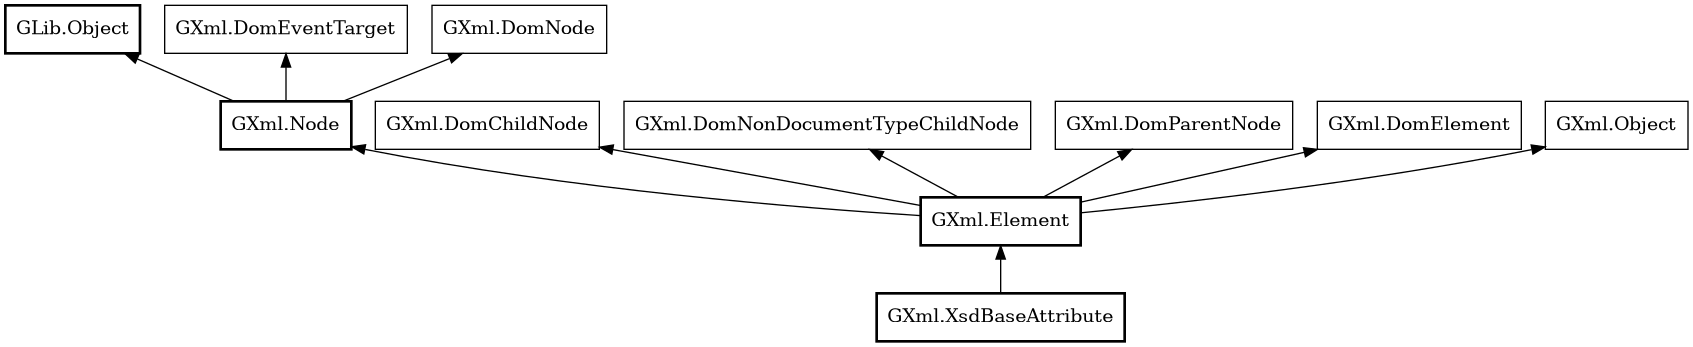 Object hierarchy for XsdBaseAttribute